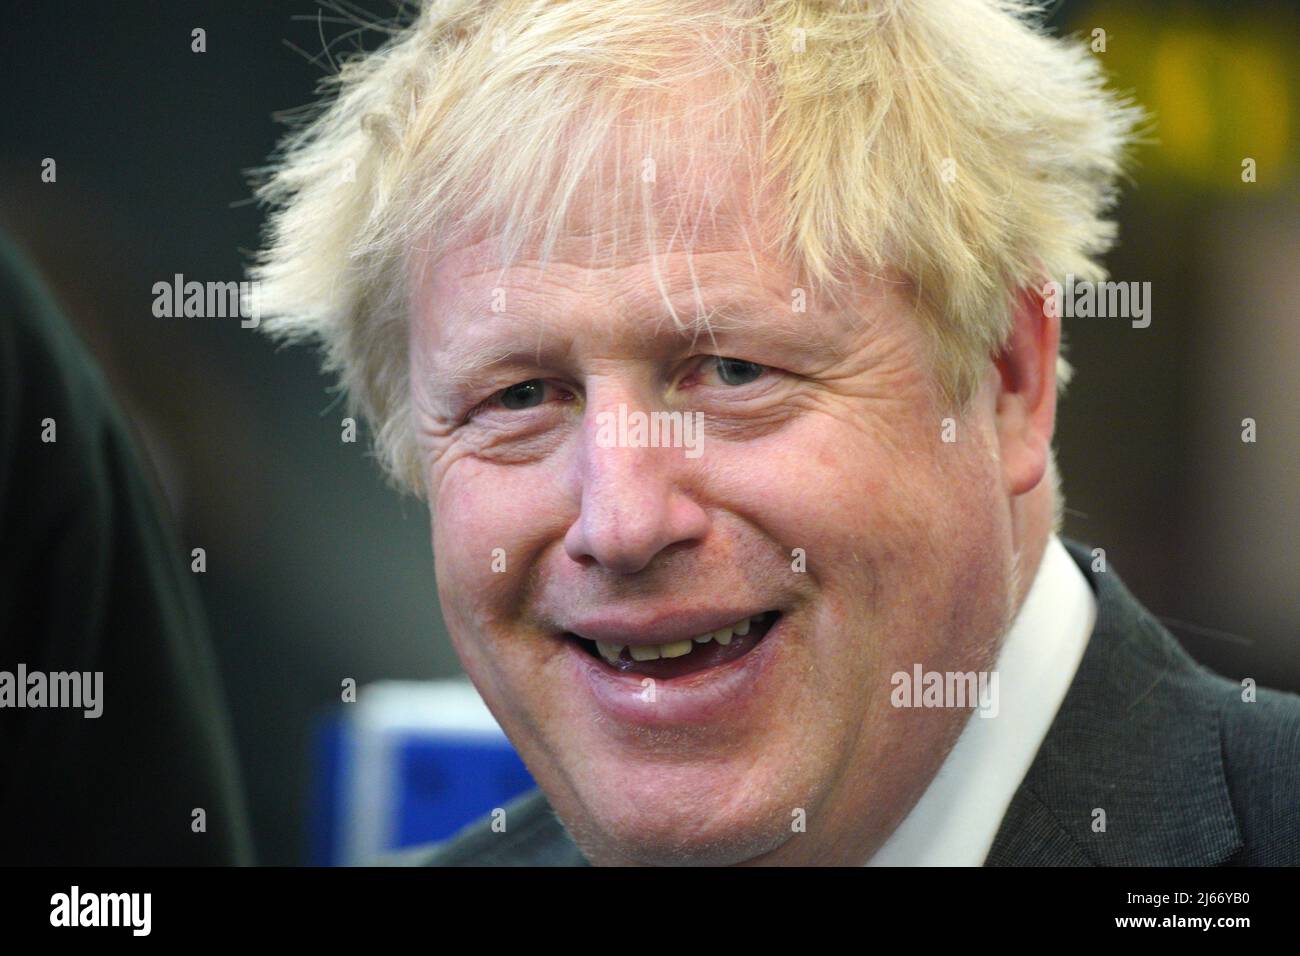 Britain's Prime Minister Boris Johnson reacts during a campaign visit to Burnley College Sixth Form Centre in Burnley, Lancashire, Britain April 28, 2022. Peter Byrne/Pool via REUTERS Stock Photo